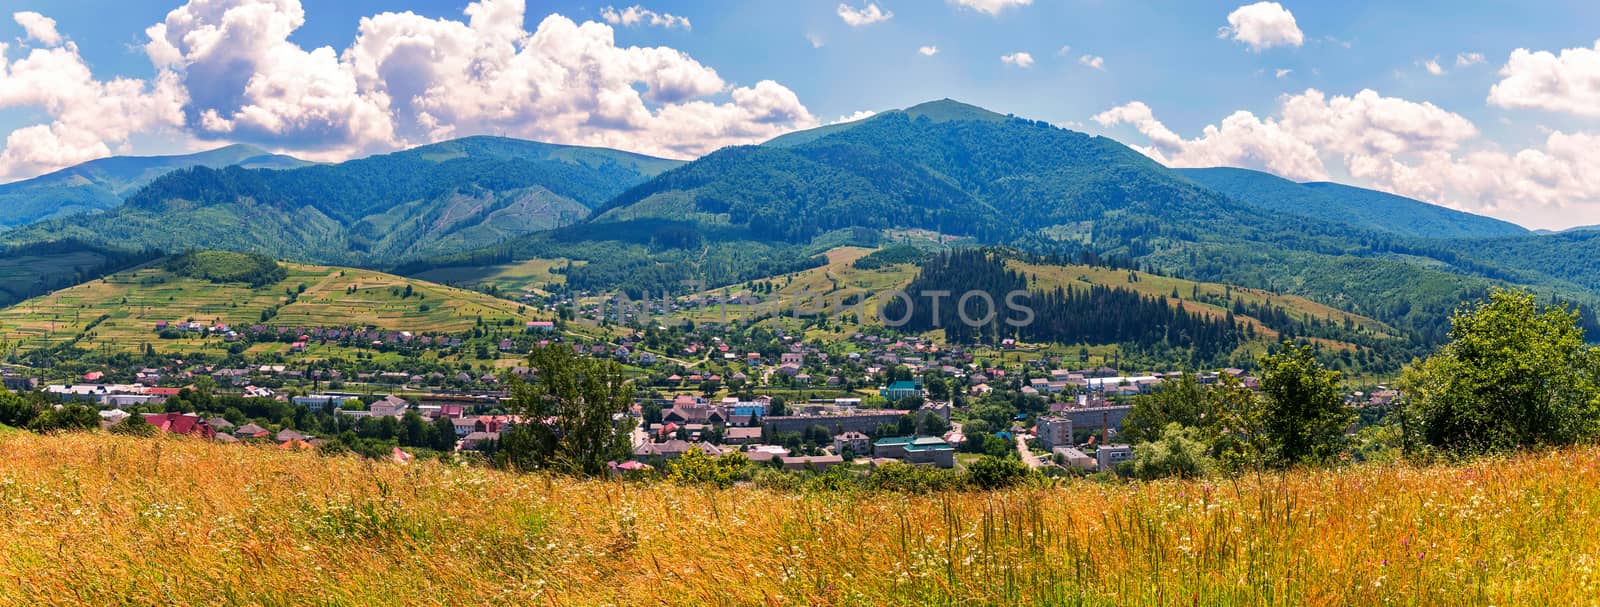 The city is located in a valley under the green mountains. The g by Adamchuk